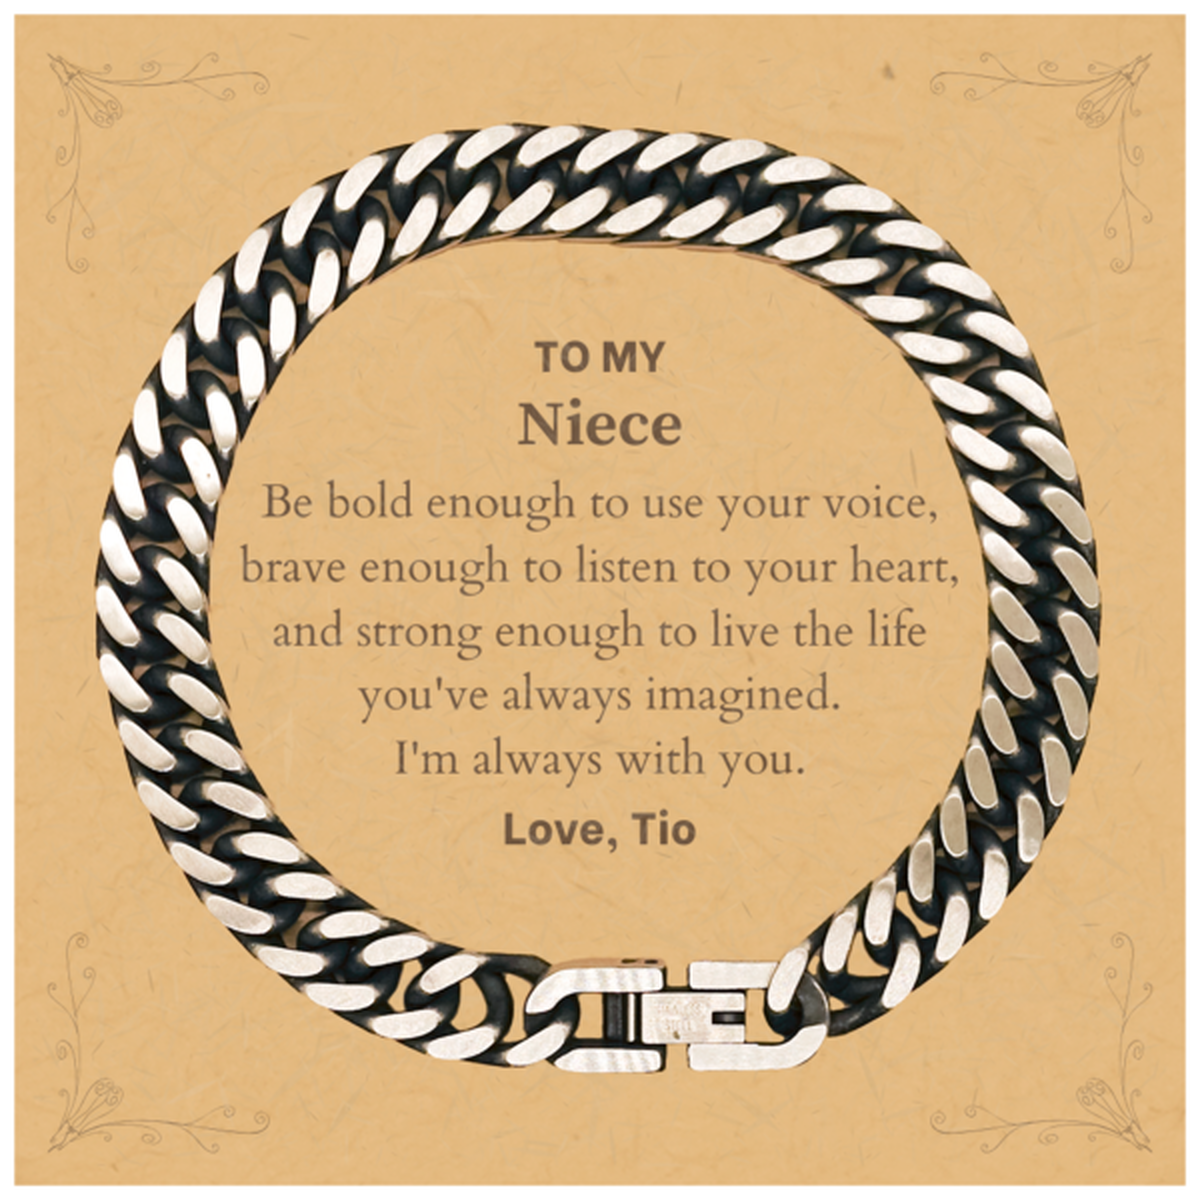 Keepsake Niece Cuban Link Chain Bracelet Gift Idea Graduation Christmas Birthday Niece from Tio, Niece Be bold enough to use your voice, brave enough to listen to your heart. Love, Tio